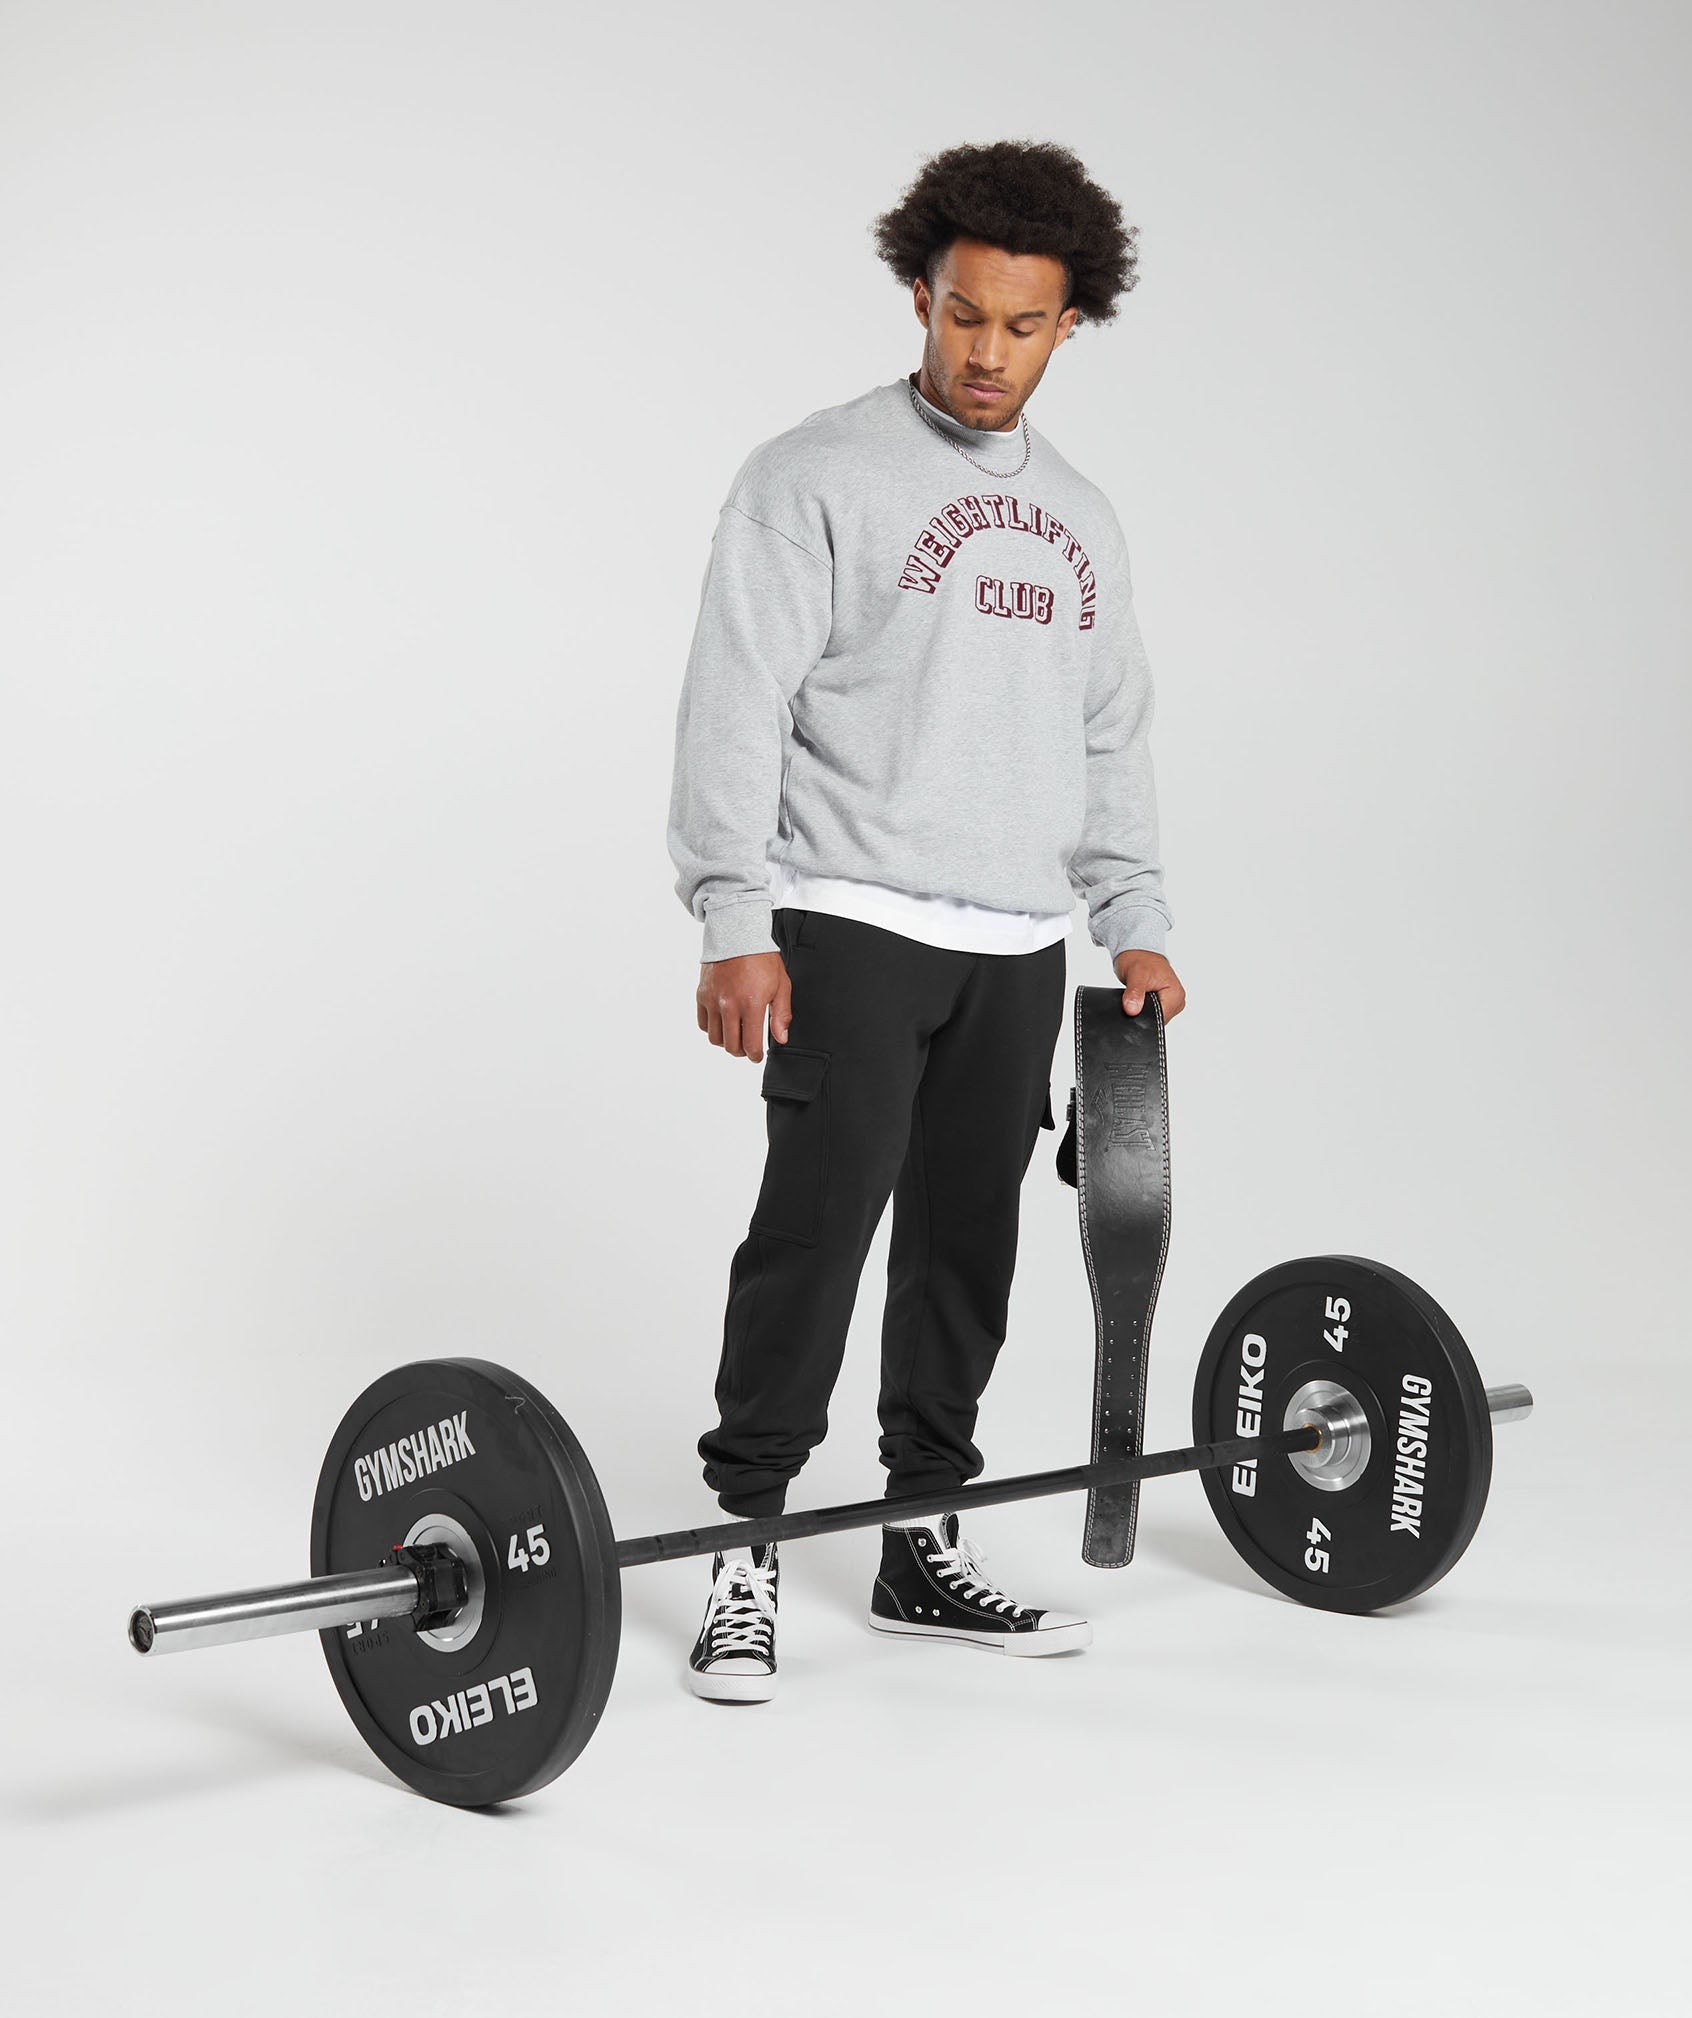 Weightlifting Club Crew in Light Grey Core Marl - view 4